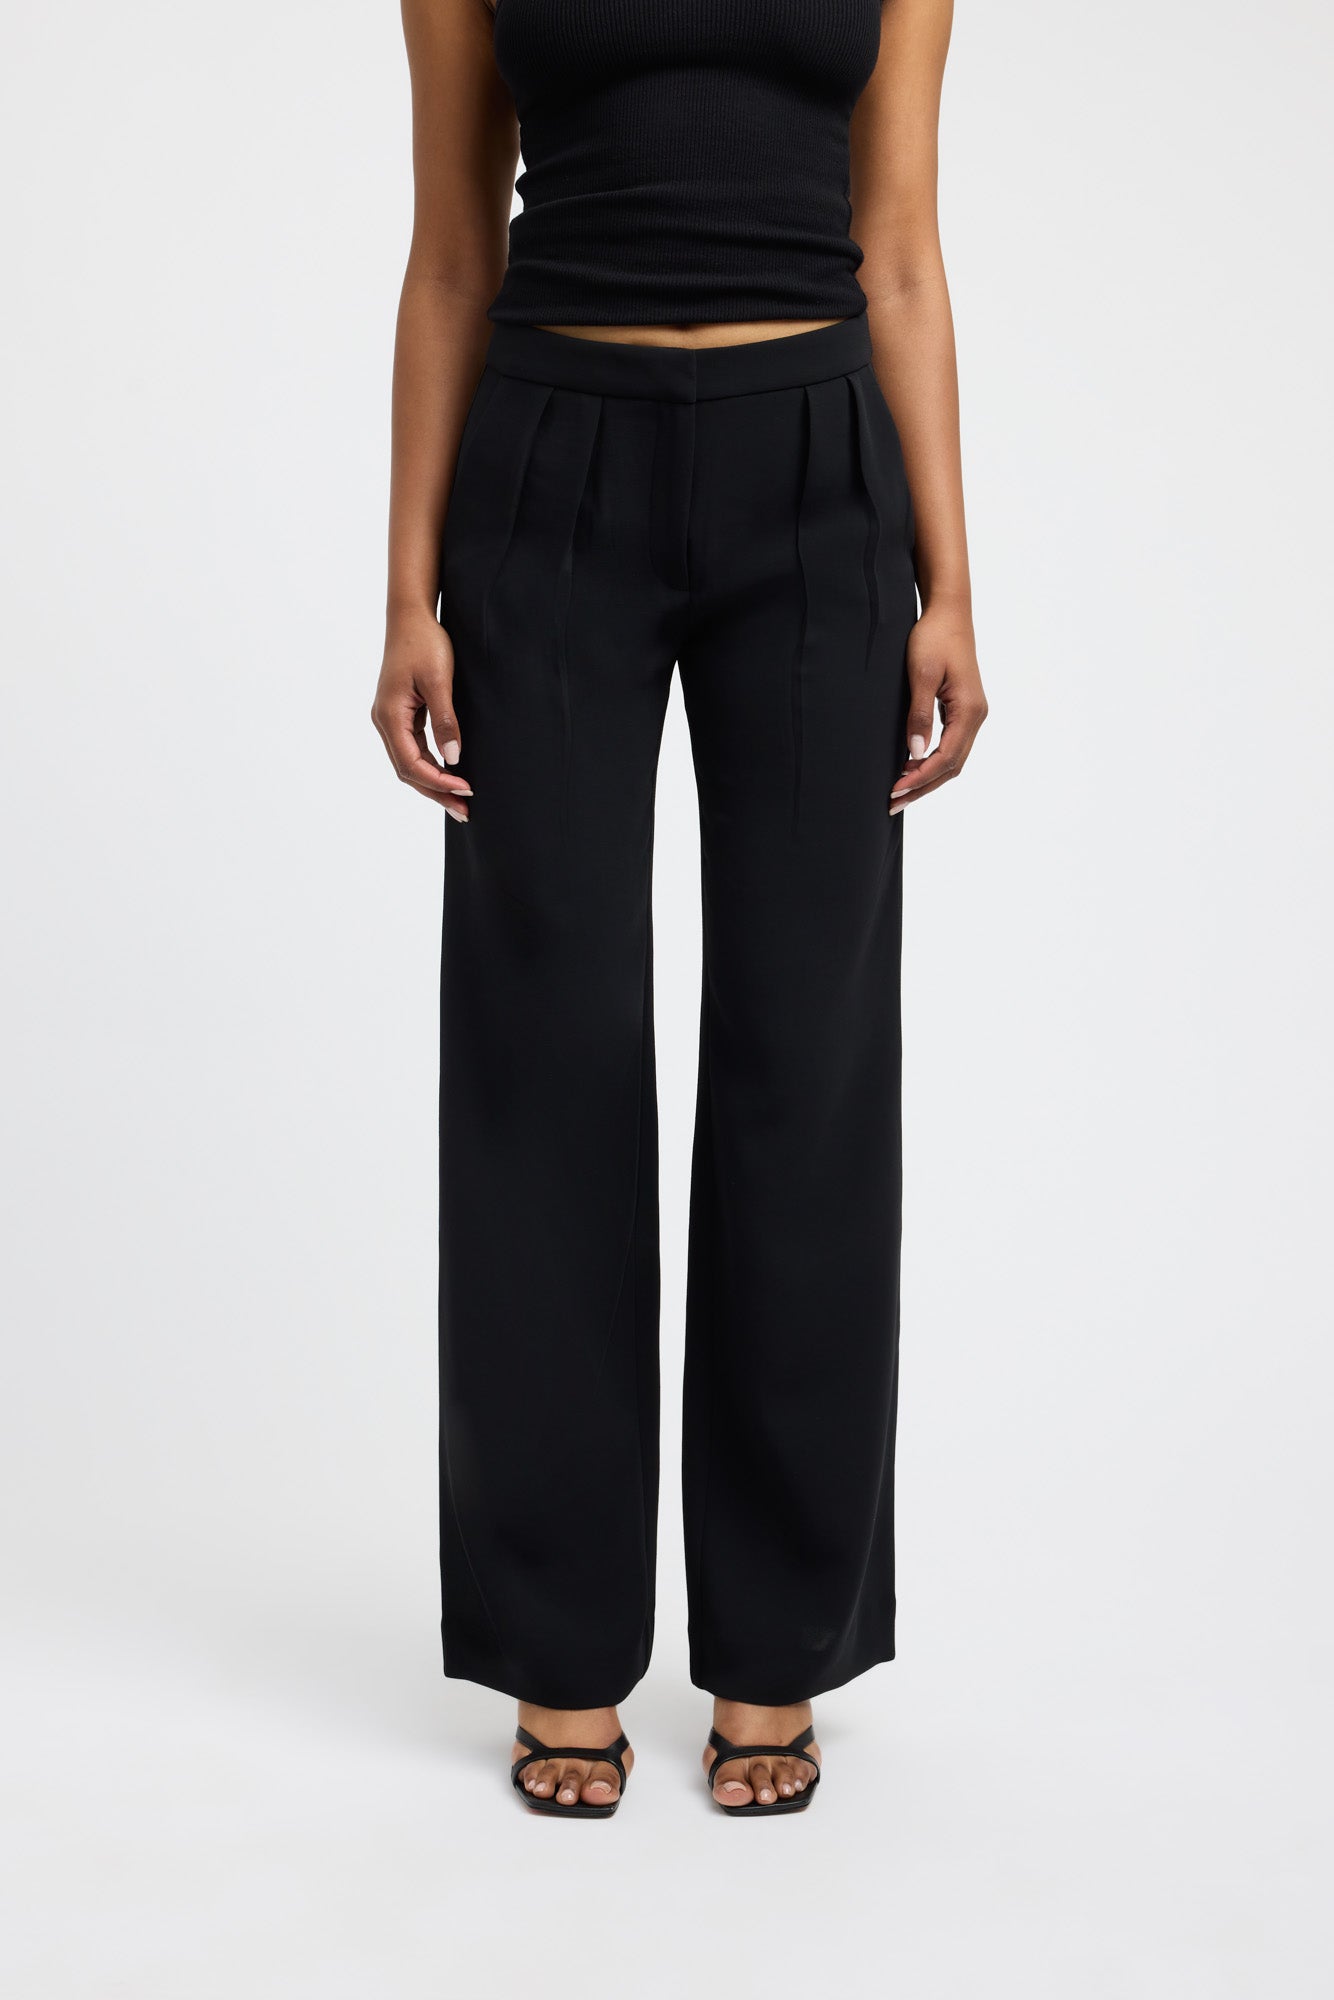 Courreges Low-Rise Flared Trousers - ShopStyle Wide-Leg Pants